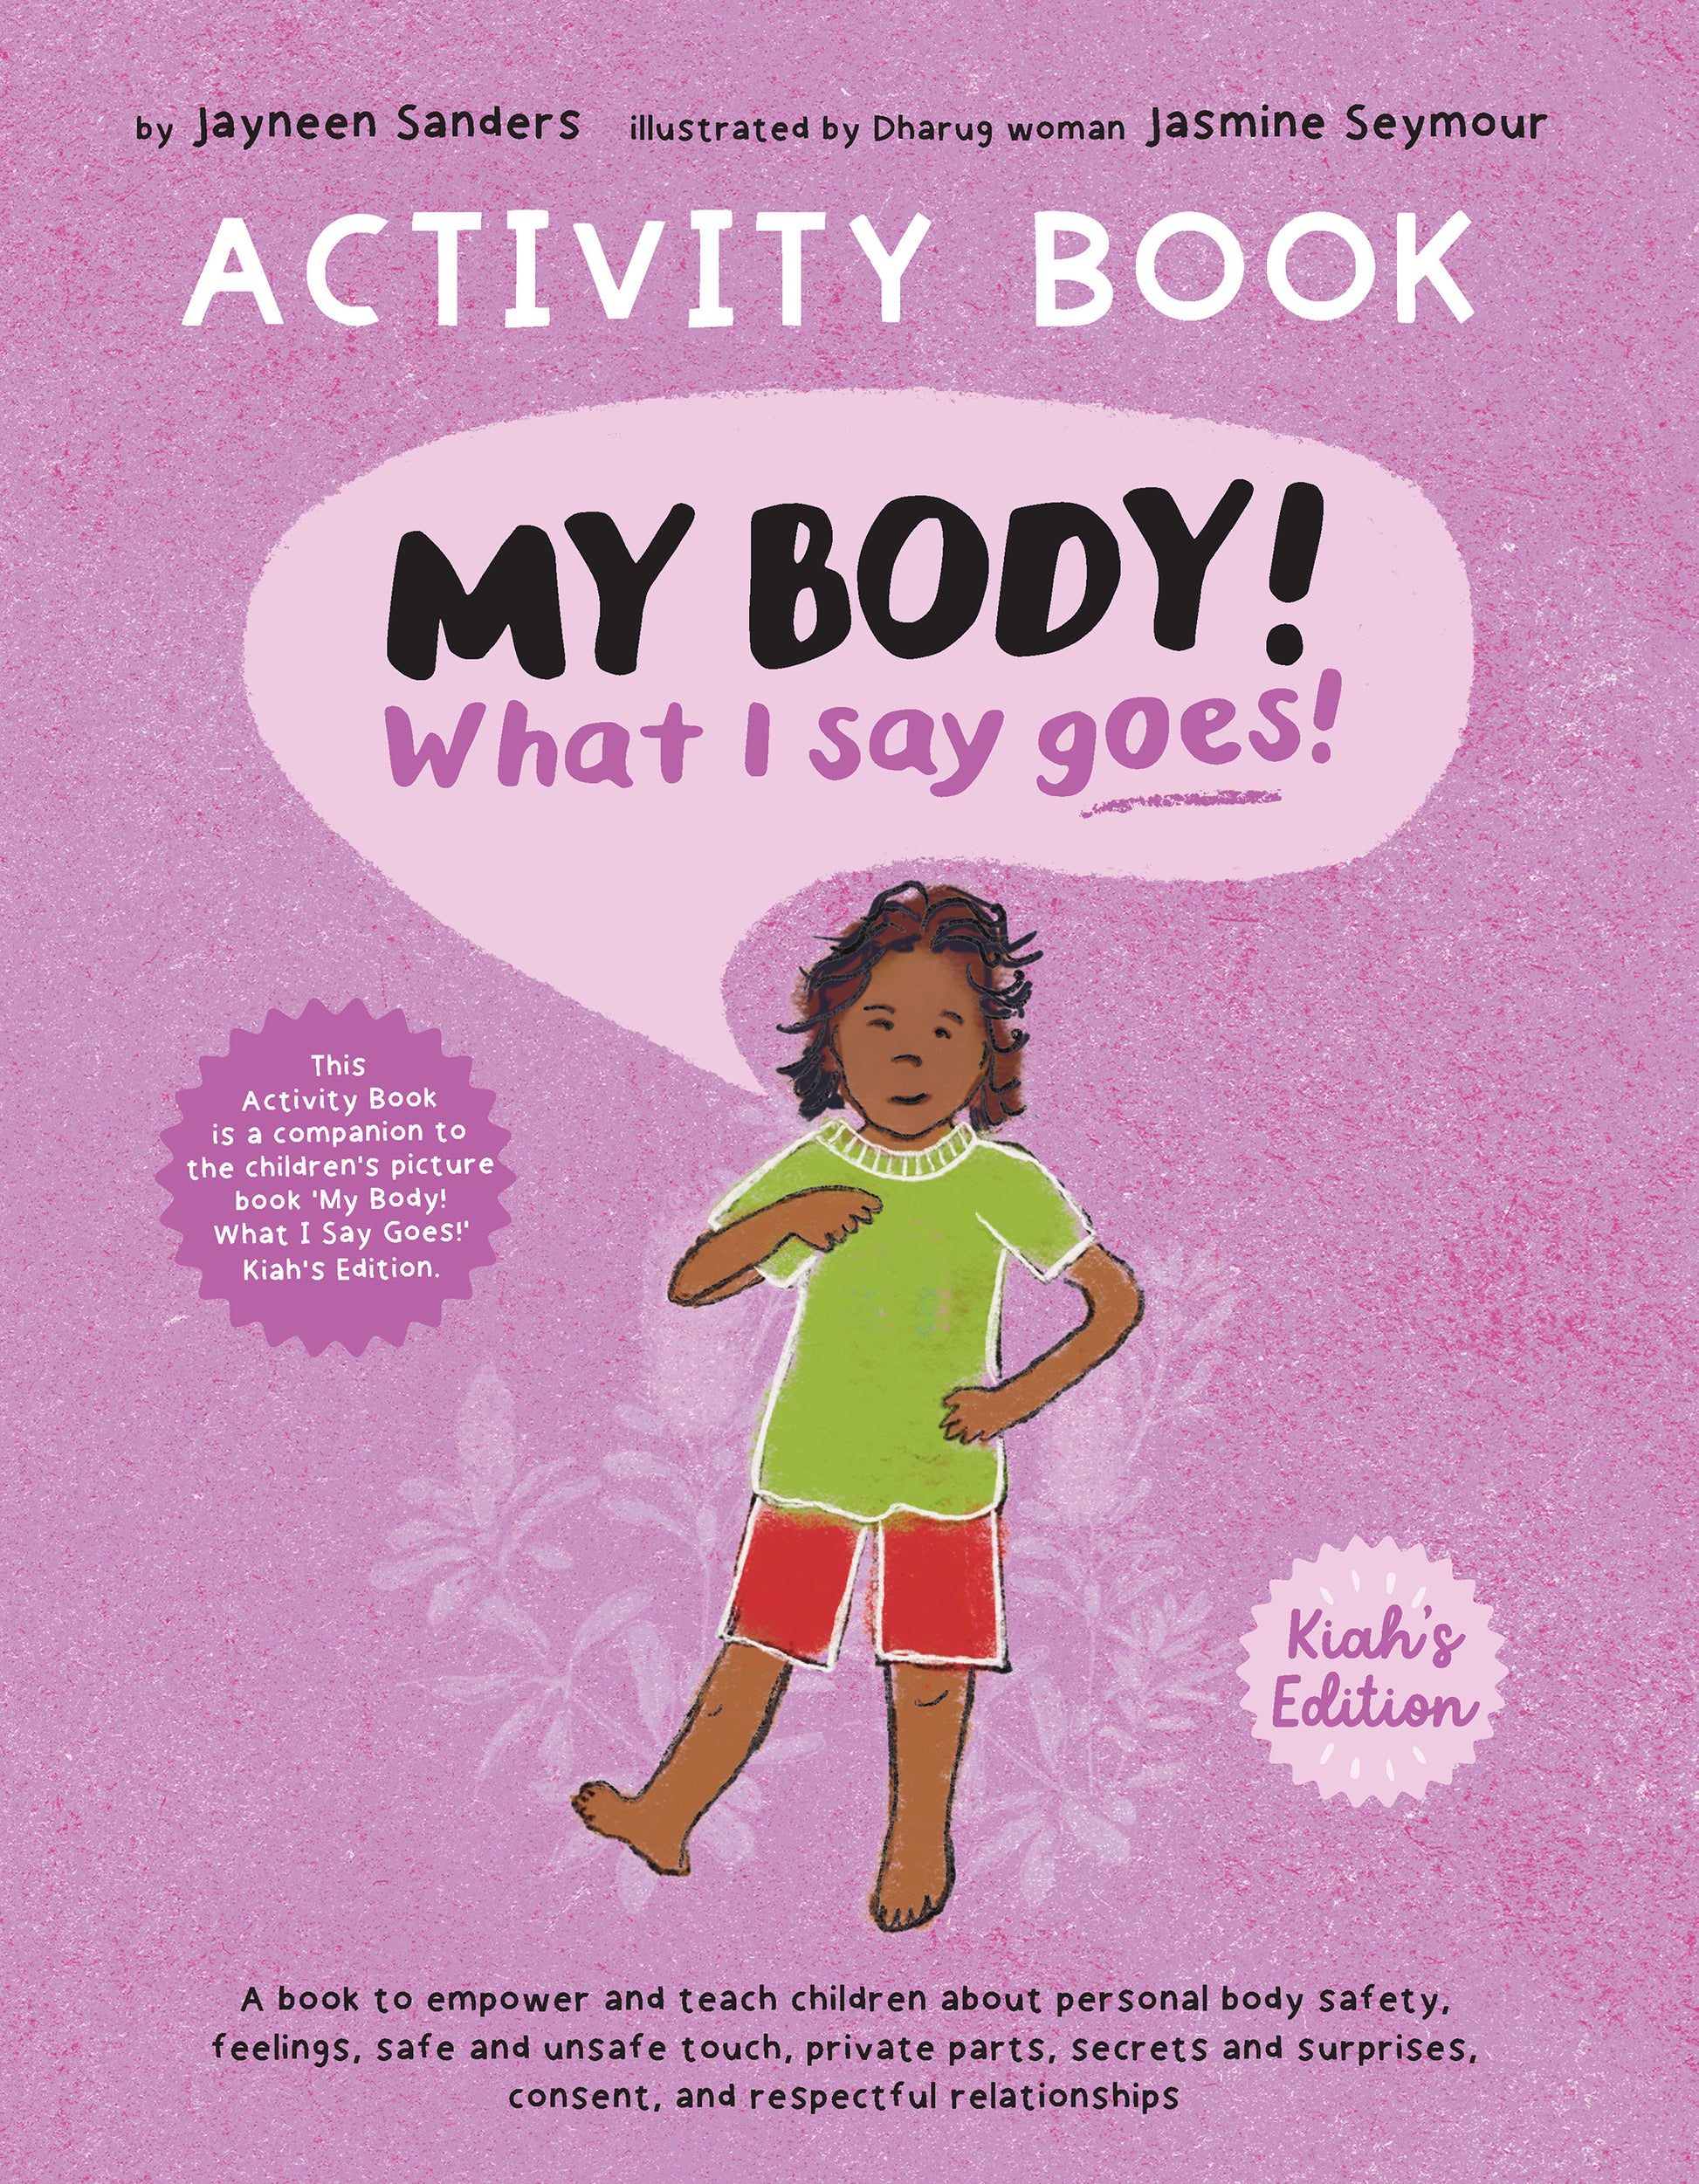 The cover of the book 'My Body! what I Say Goes! Kiah's Edition. Activity Book.' by Jayneen Sanders